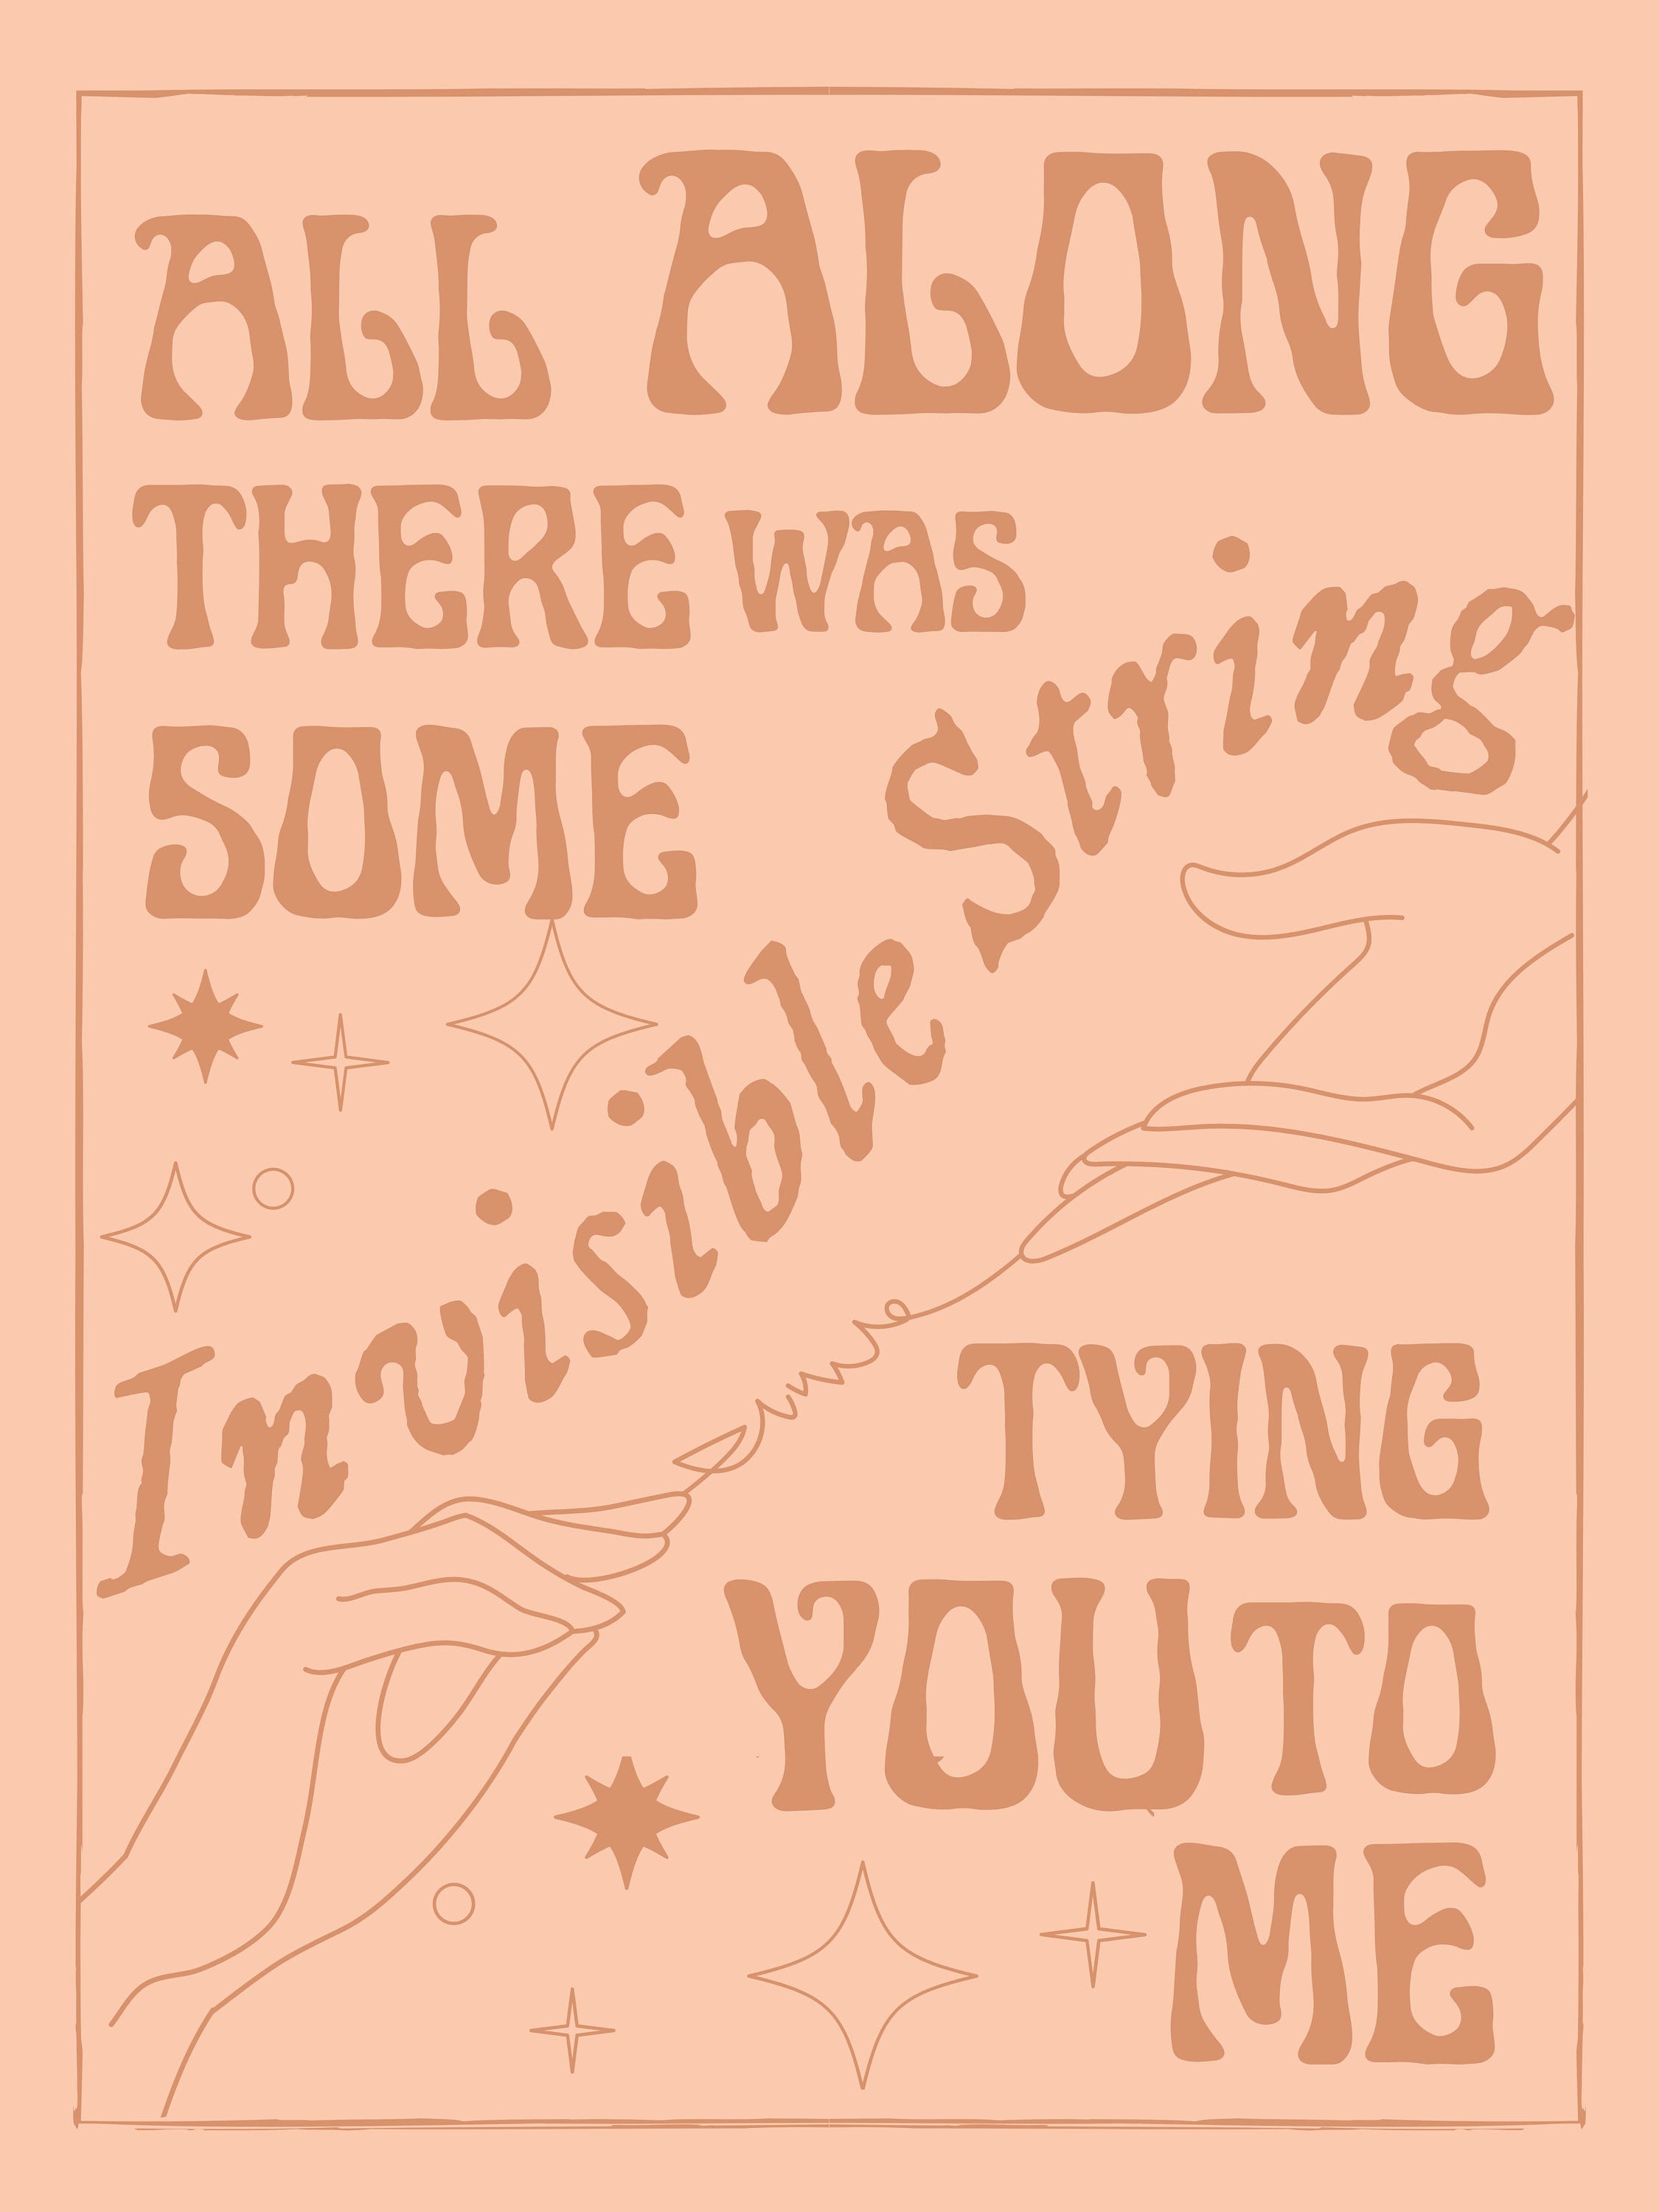 invisible string - song and lyrics by Taylor Swift